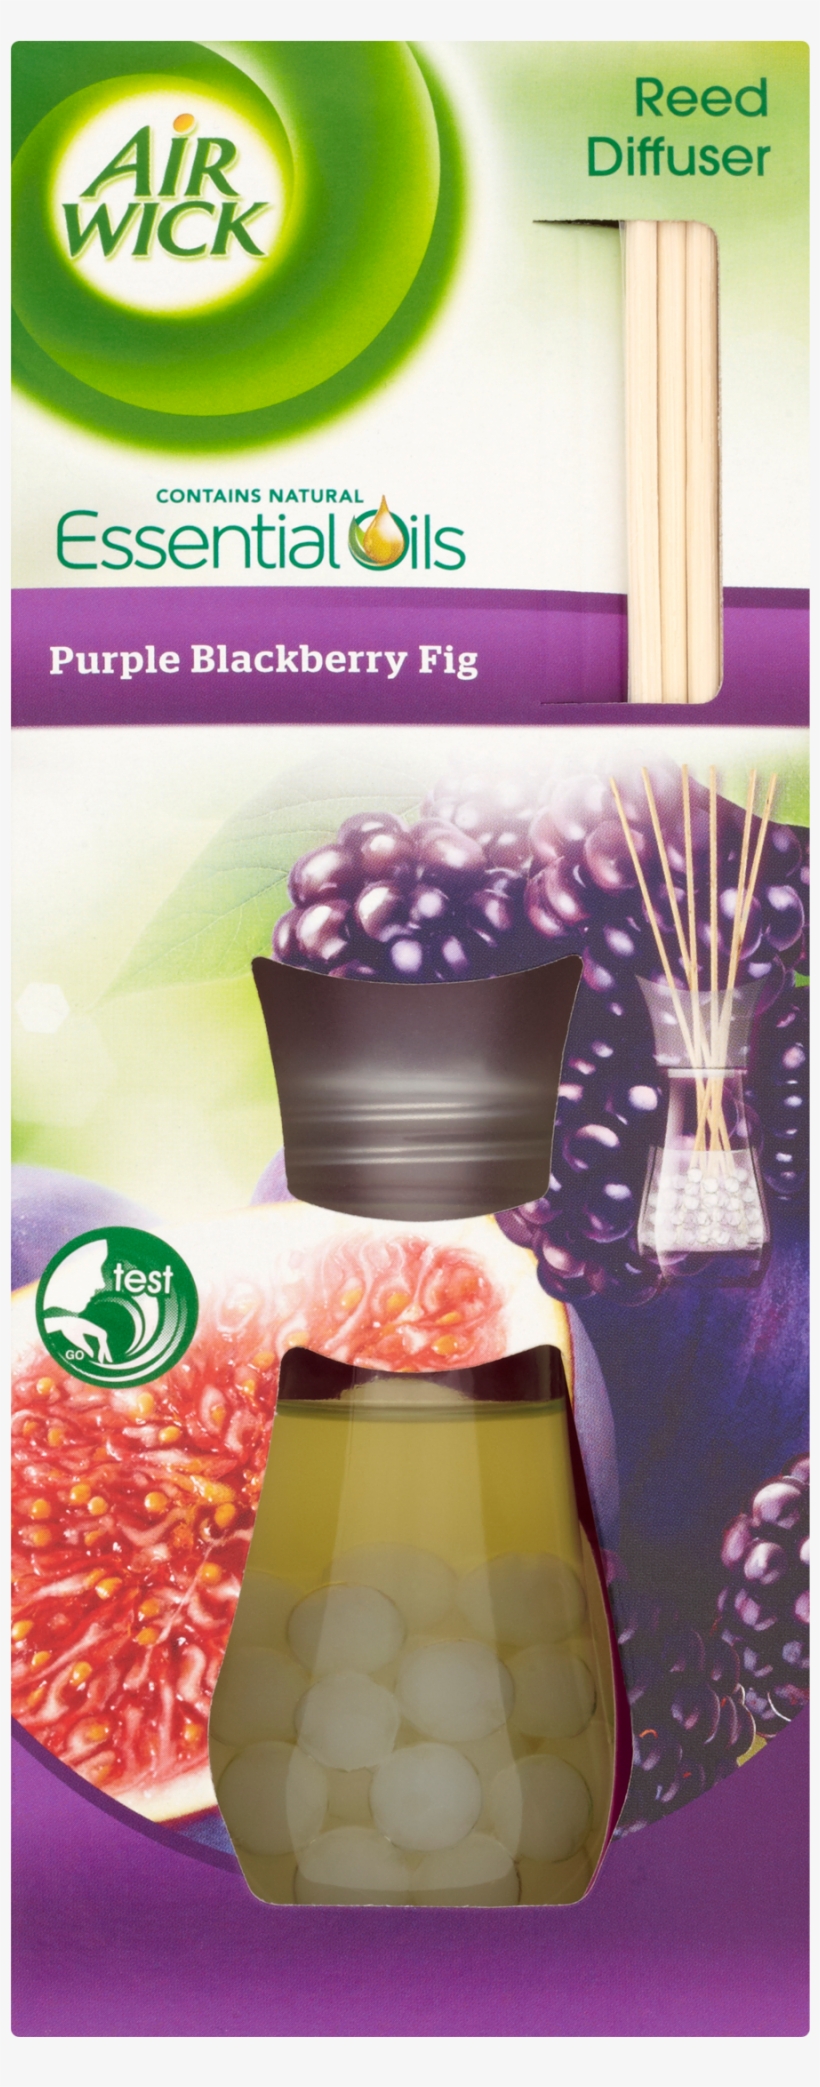 Air Wick Reed Diffuser Purple Blackberry Fig - Air Wick Reed Diffuser, transparent png #458099